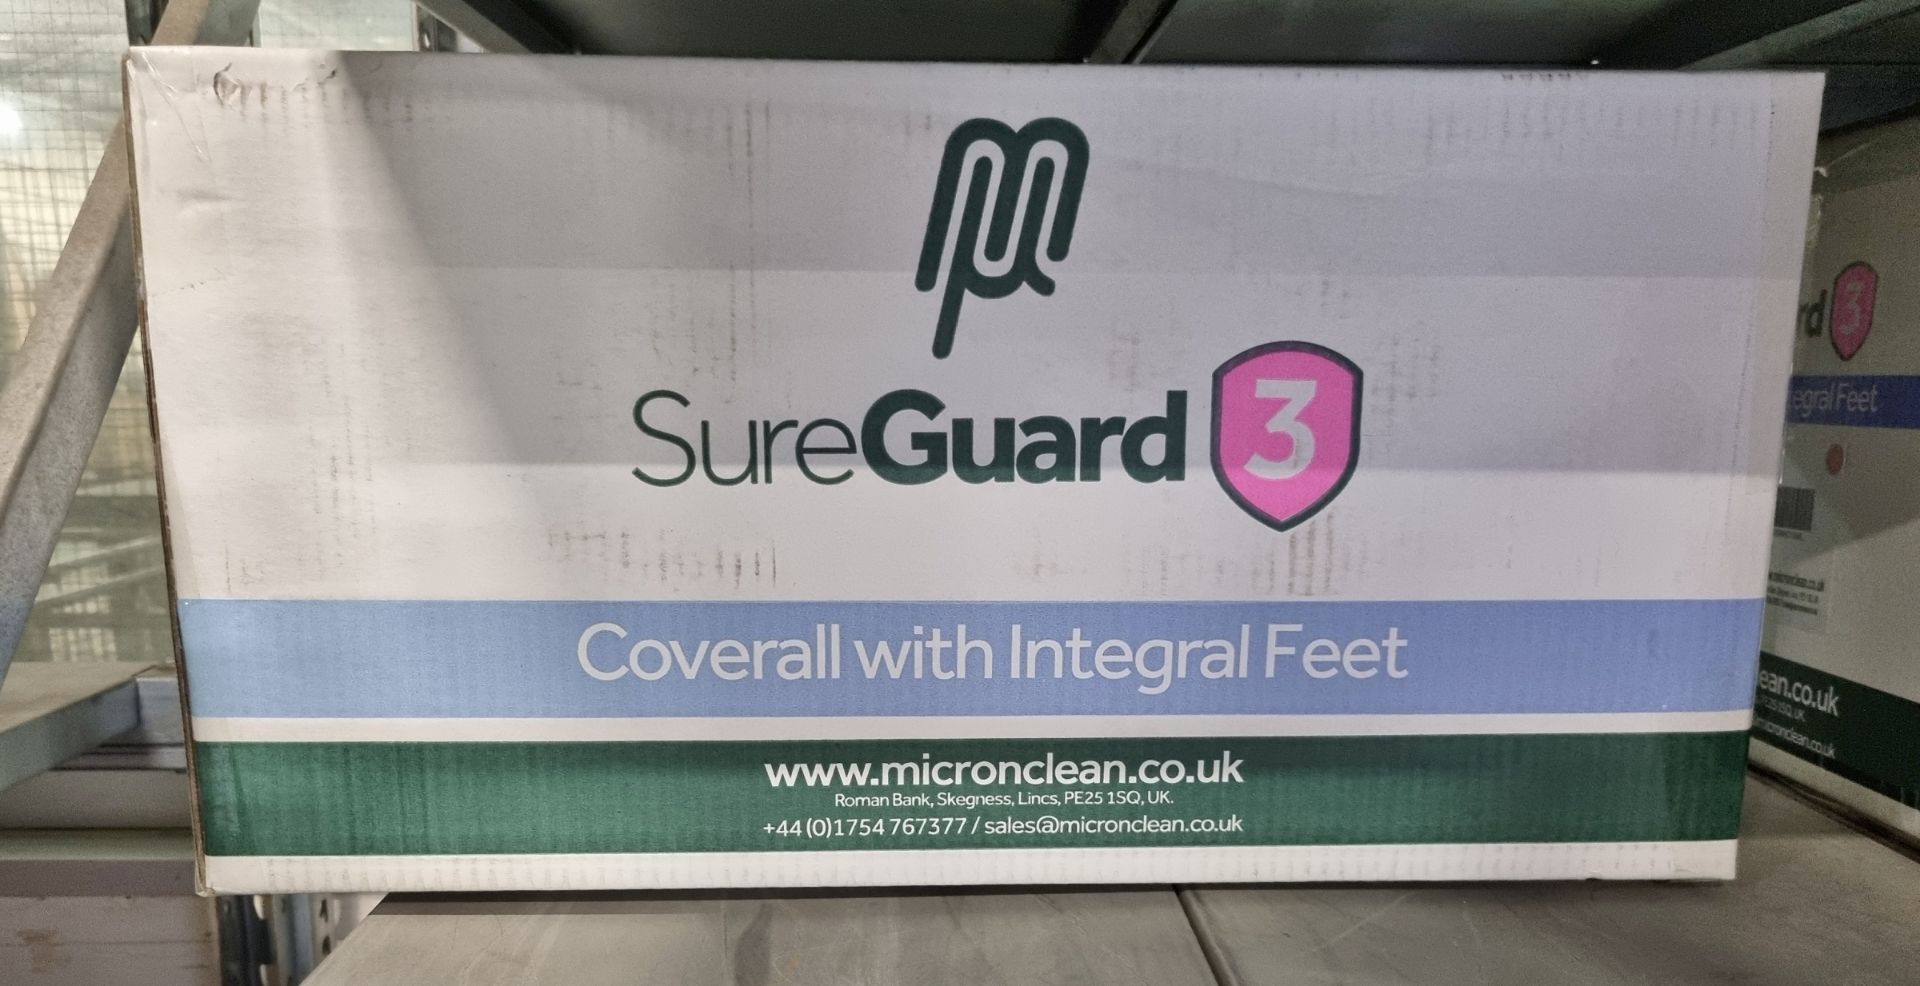 2x boxes of MicroClean SureGuard 3 - size small coverall with integral feet - 25 units per box - Image 6 of 6